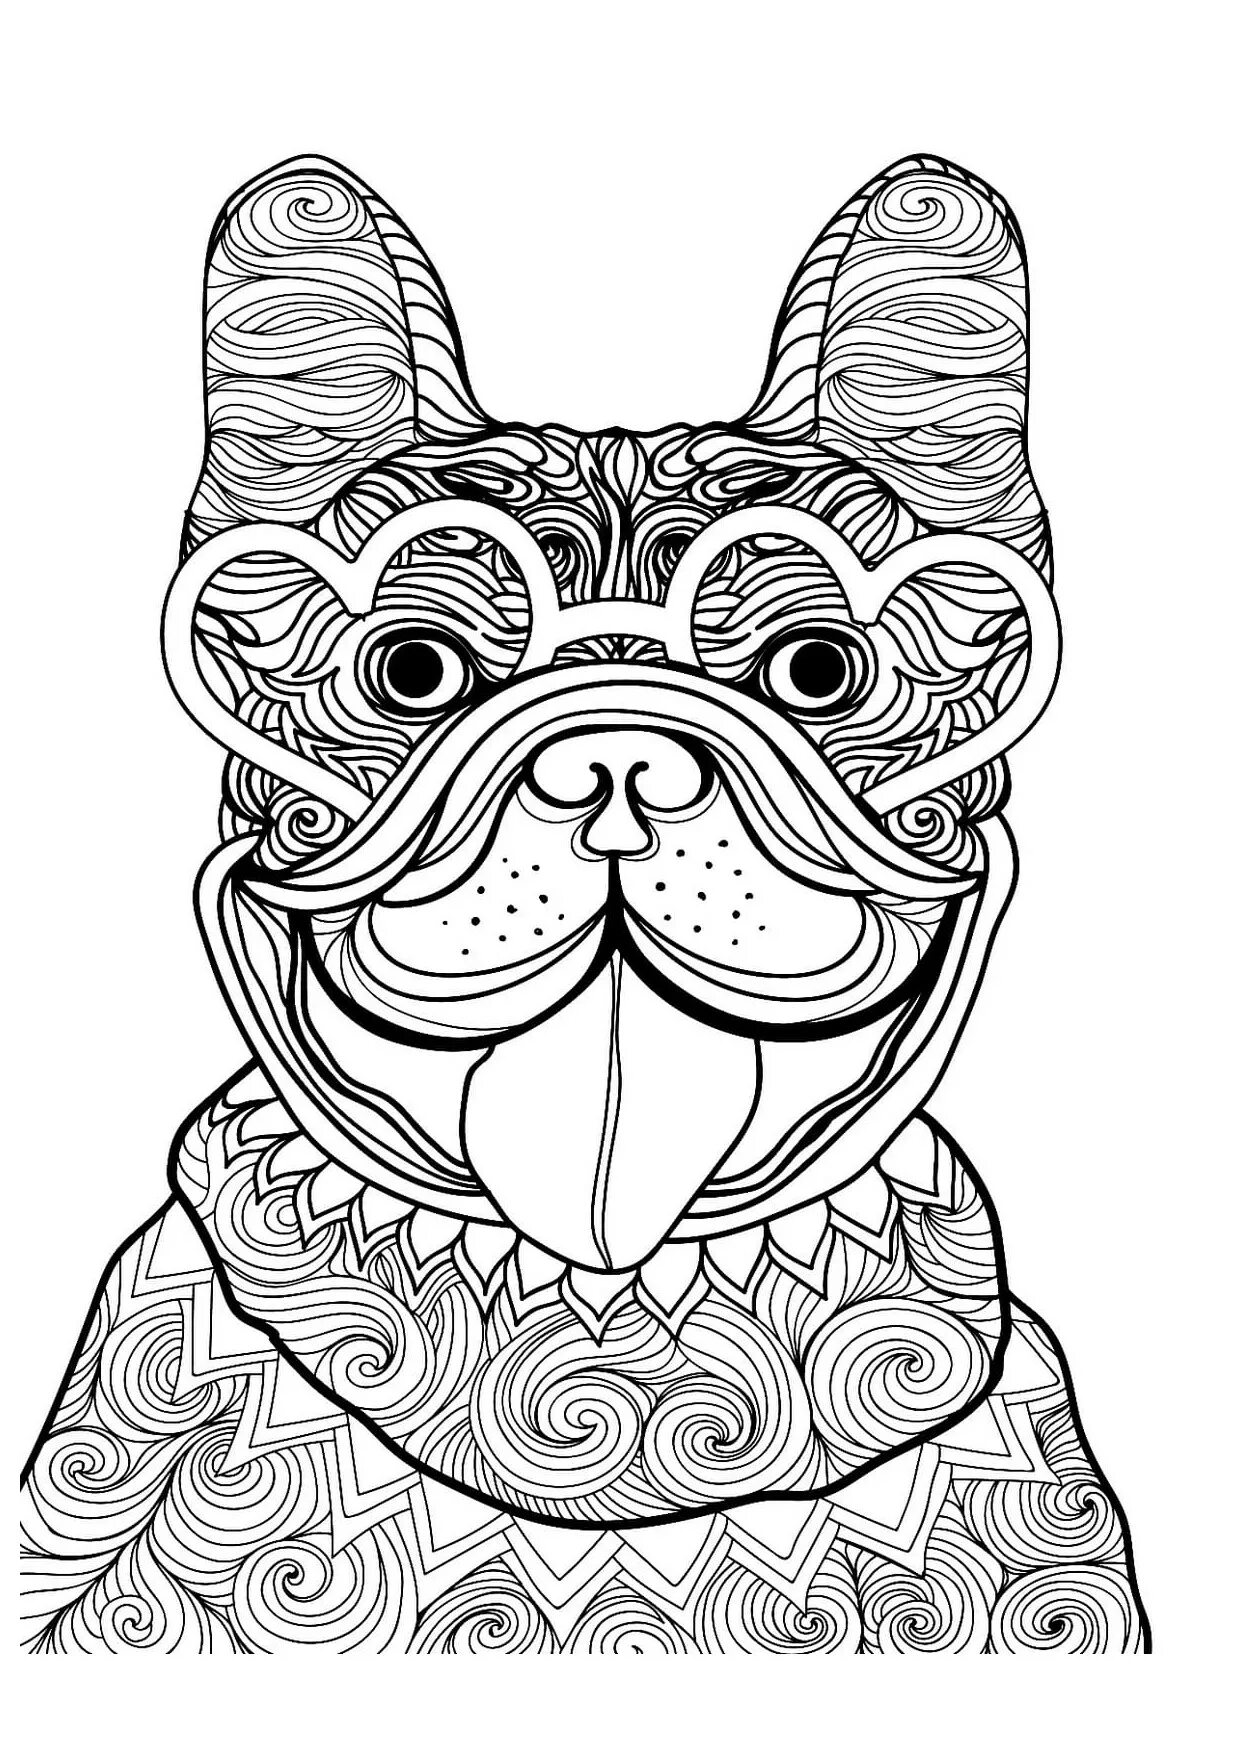 Attractive antistress dog coloring book